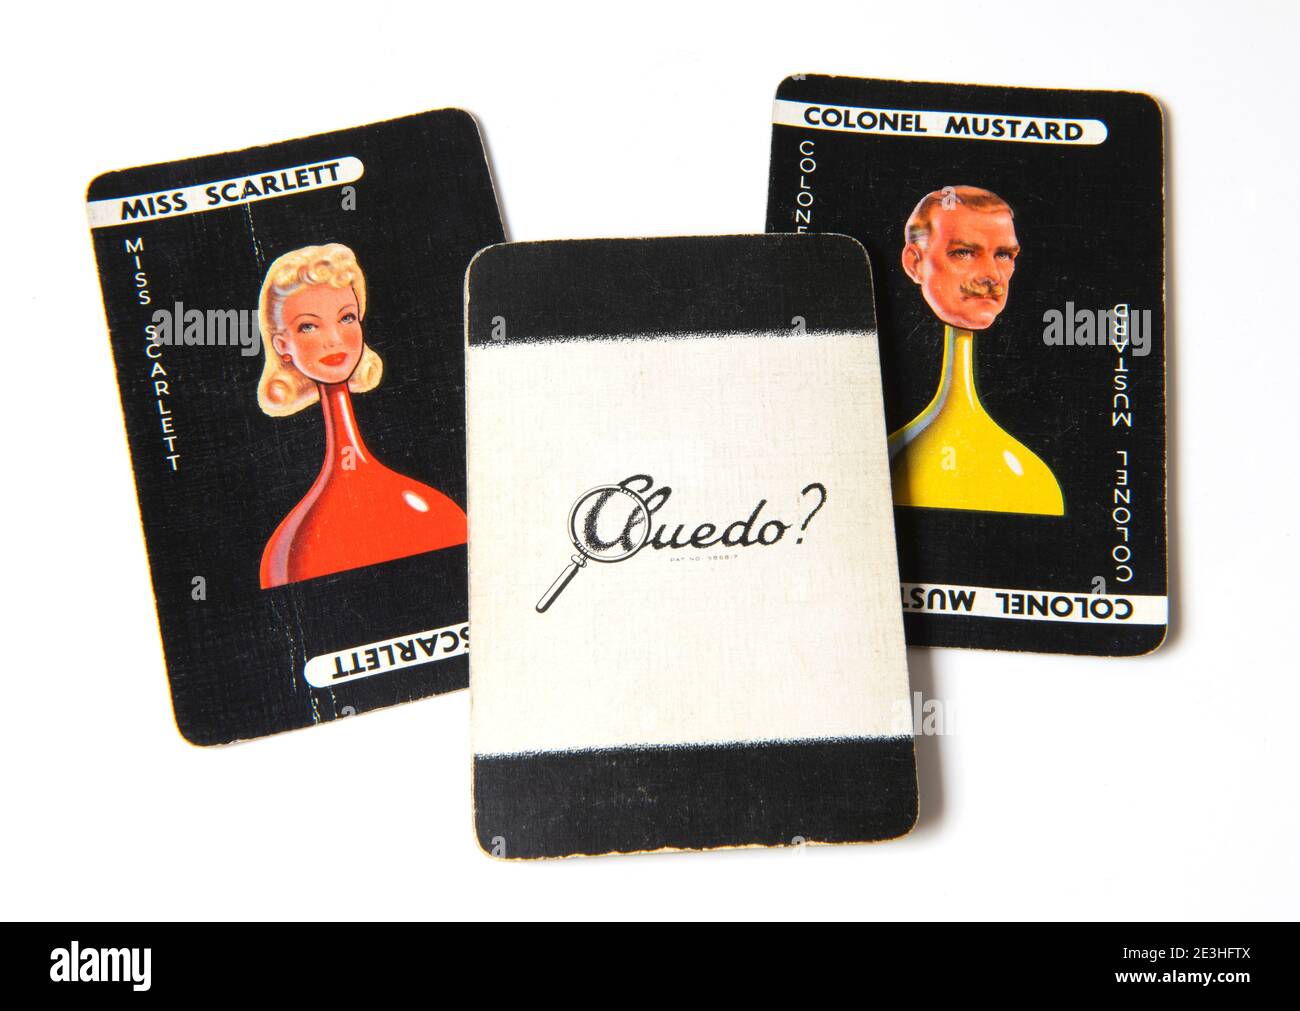 Set of Cluedo detective game cards from a 1949 version of the board game on a white background Stock Photo